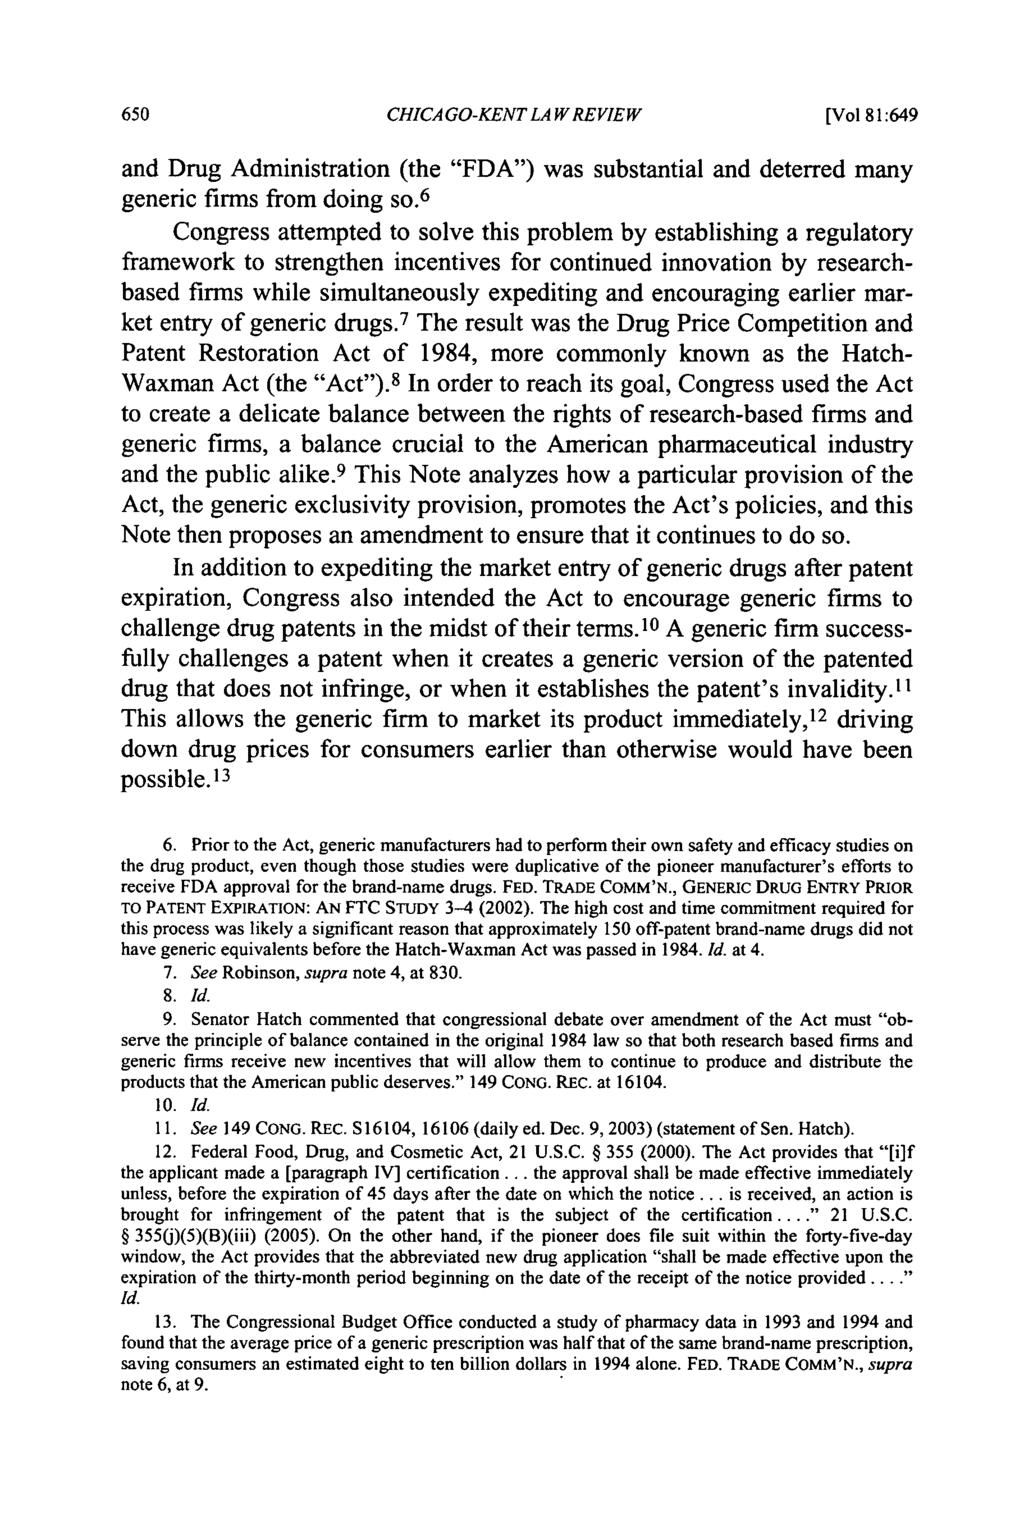 CHICA GO-KENT LA W REVIEW [Vol 81:649 and Drug Administration (the "FDA") was substantial and deterred many generic firms from doing so.